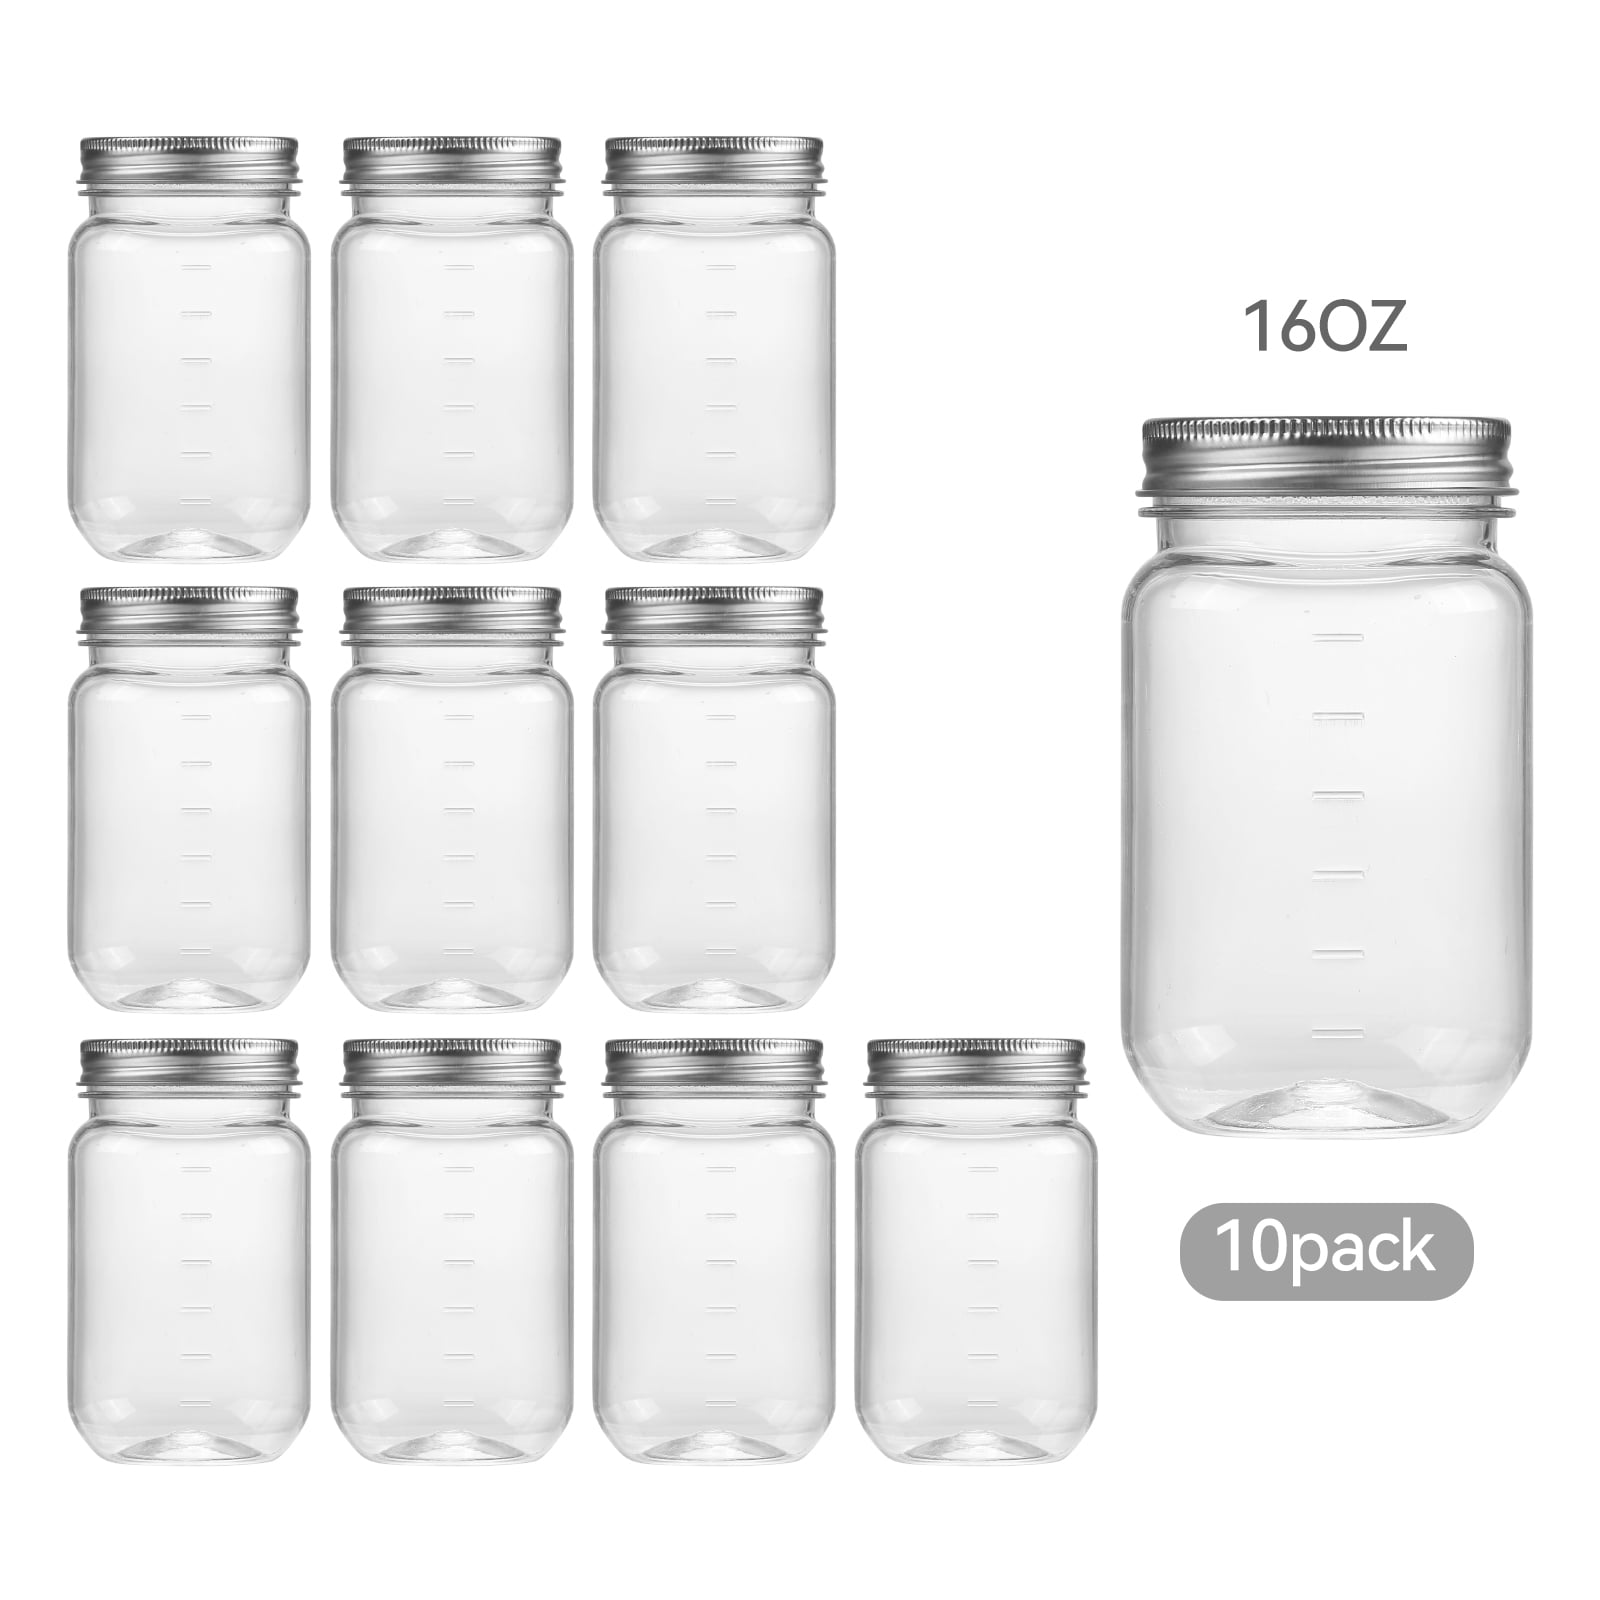 Thermos® Stainless King™ Stainless Steel Food Jar - 16 oz.